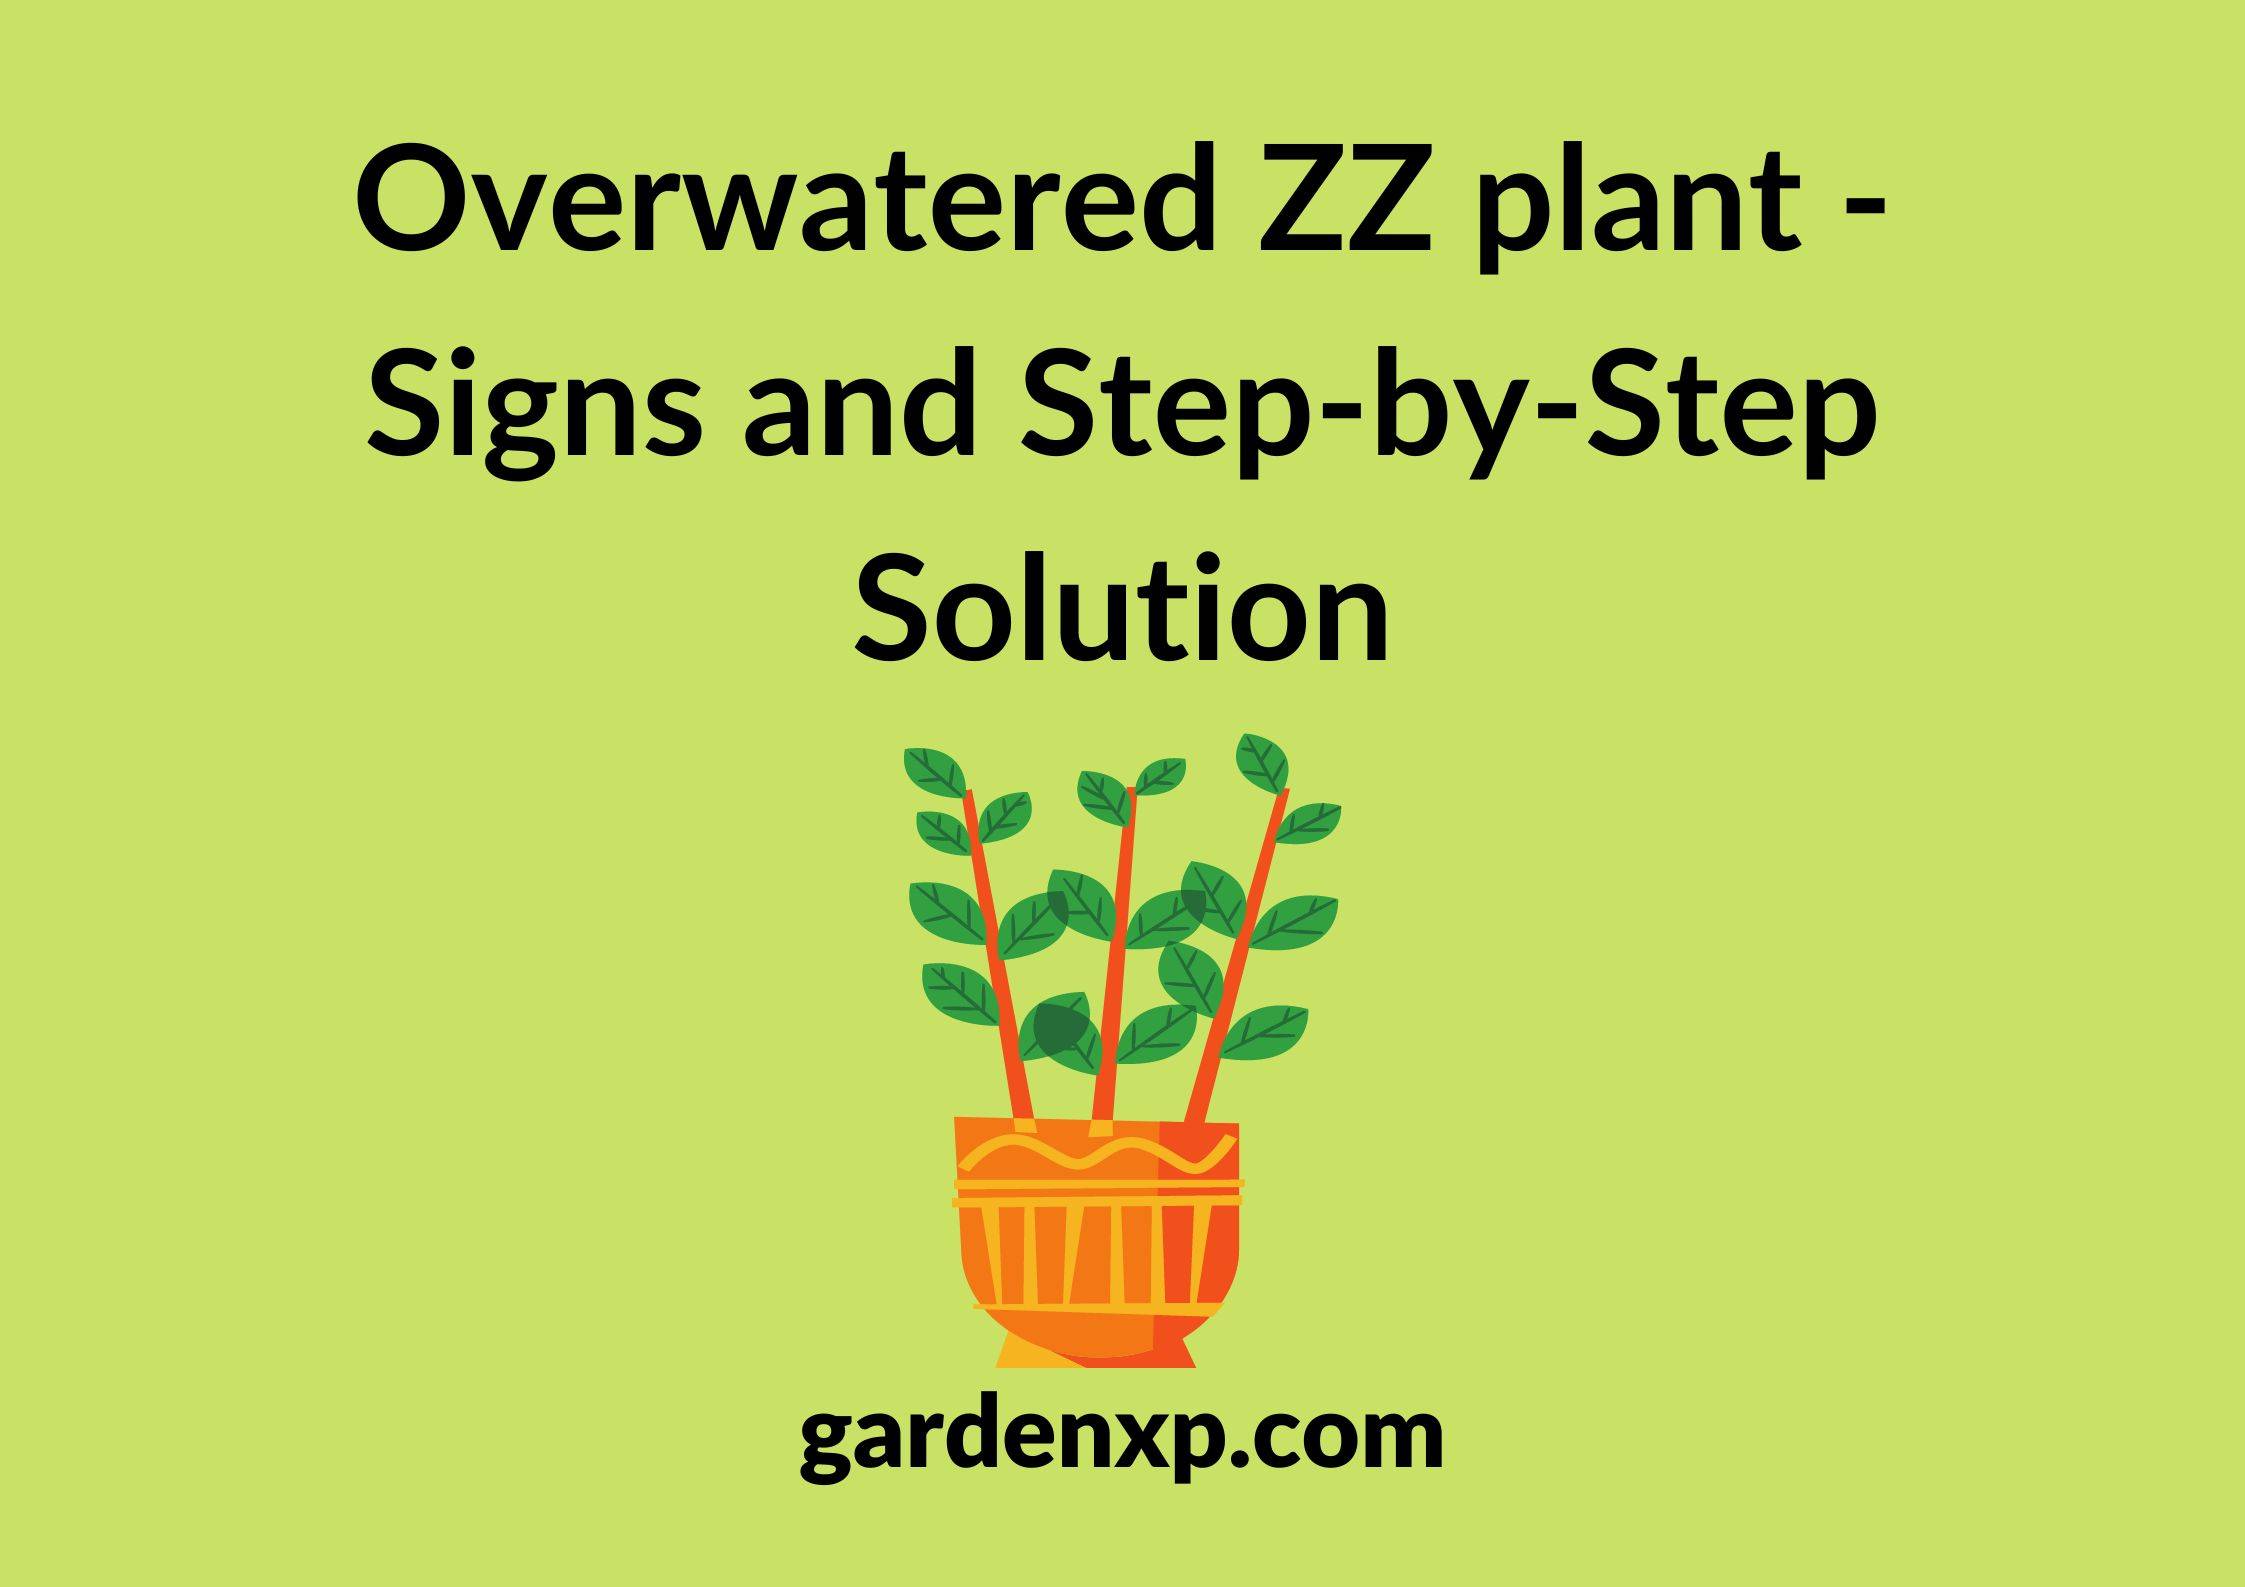 Overwatered ZZ plant - Signs and Step-by-Step Solution